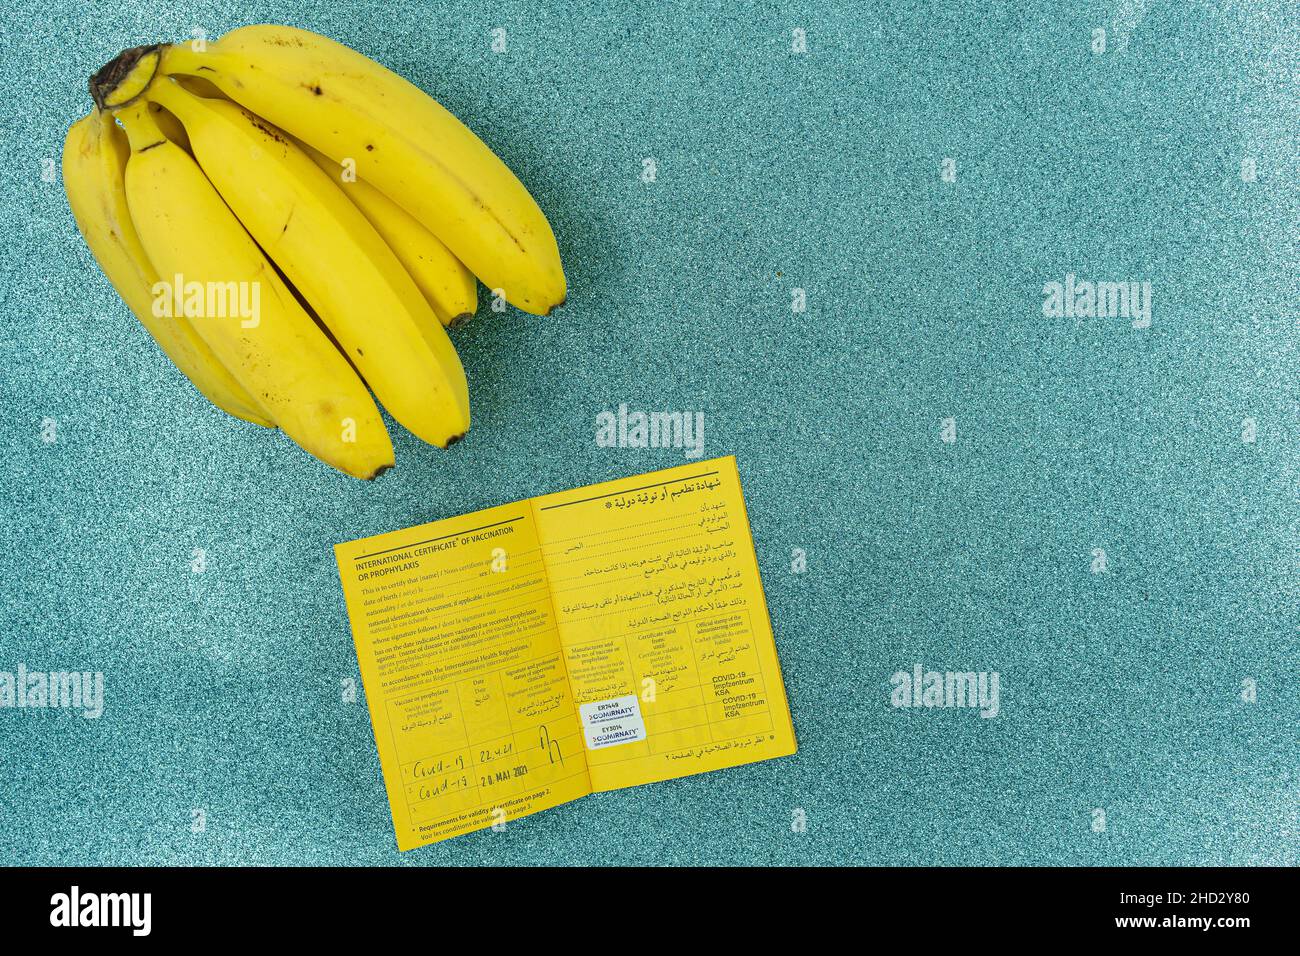 Yellow bananas and vaccine card with rubber stamp of covid-19 vaccine on turquoise background as water. Travel and covid-19 theme. Stock Photo